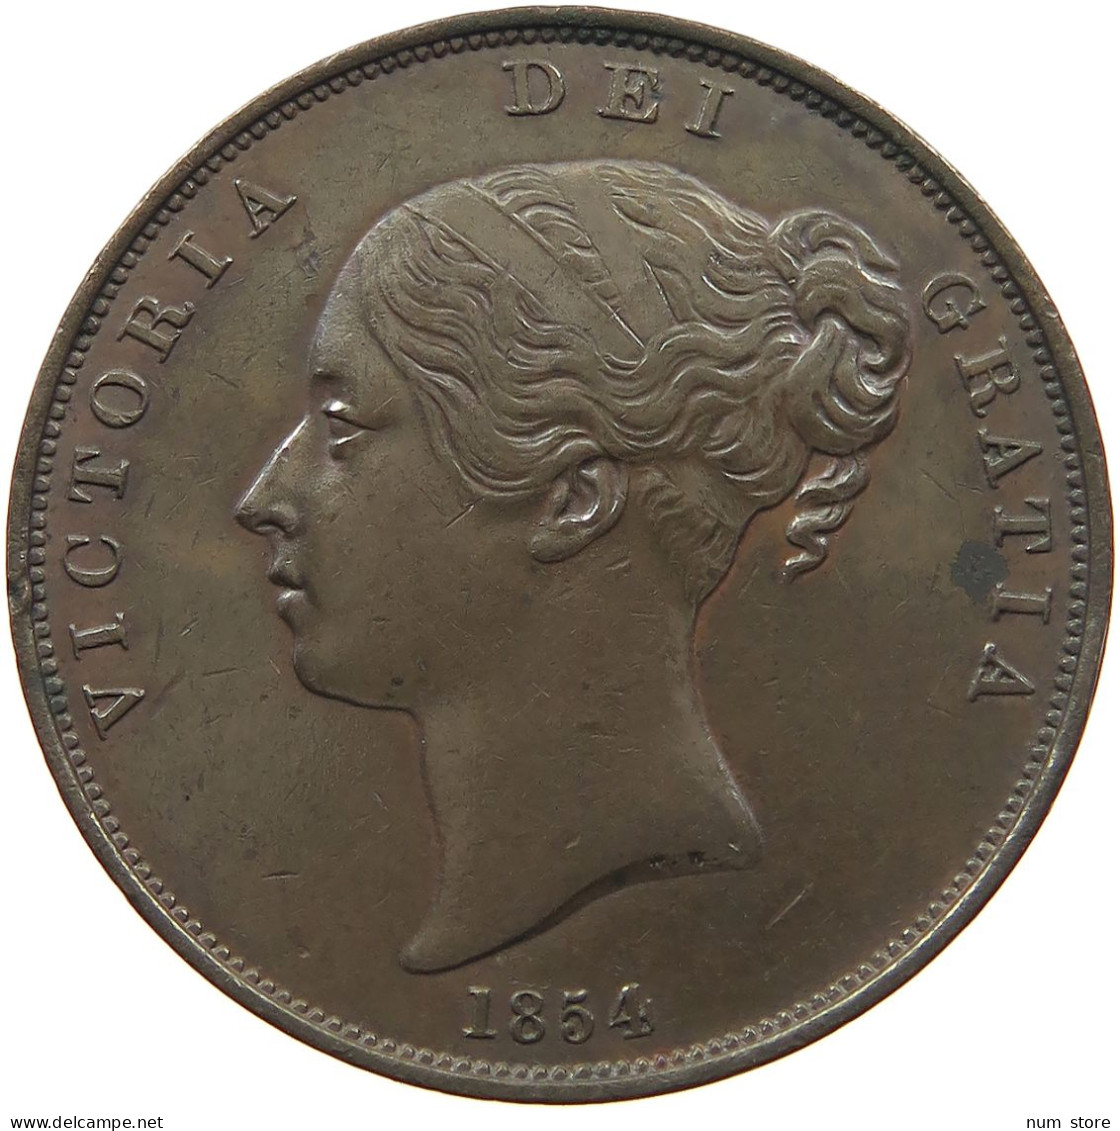 GREAT BRITAIN PENNY 1854 VICTORIA 1837-1901 #MA 022966 - D. 1 Penny